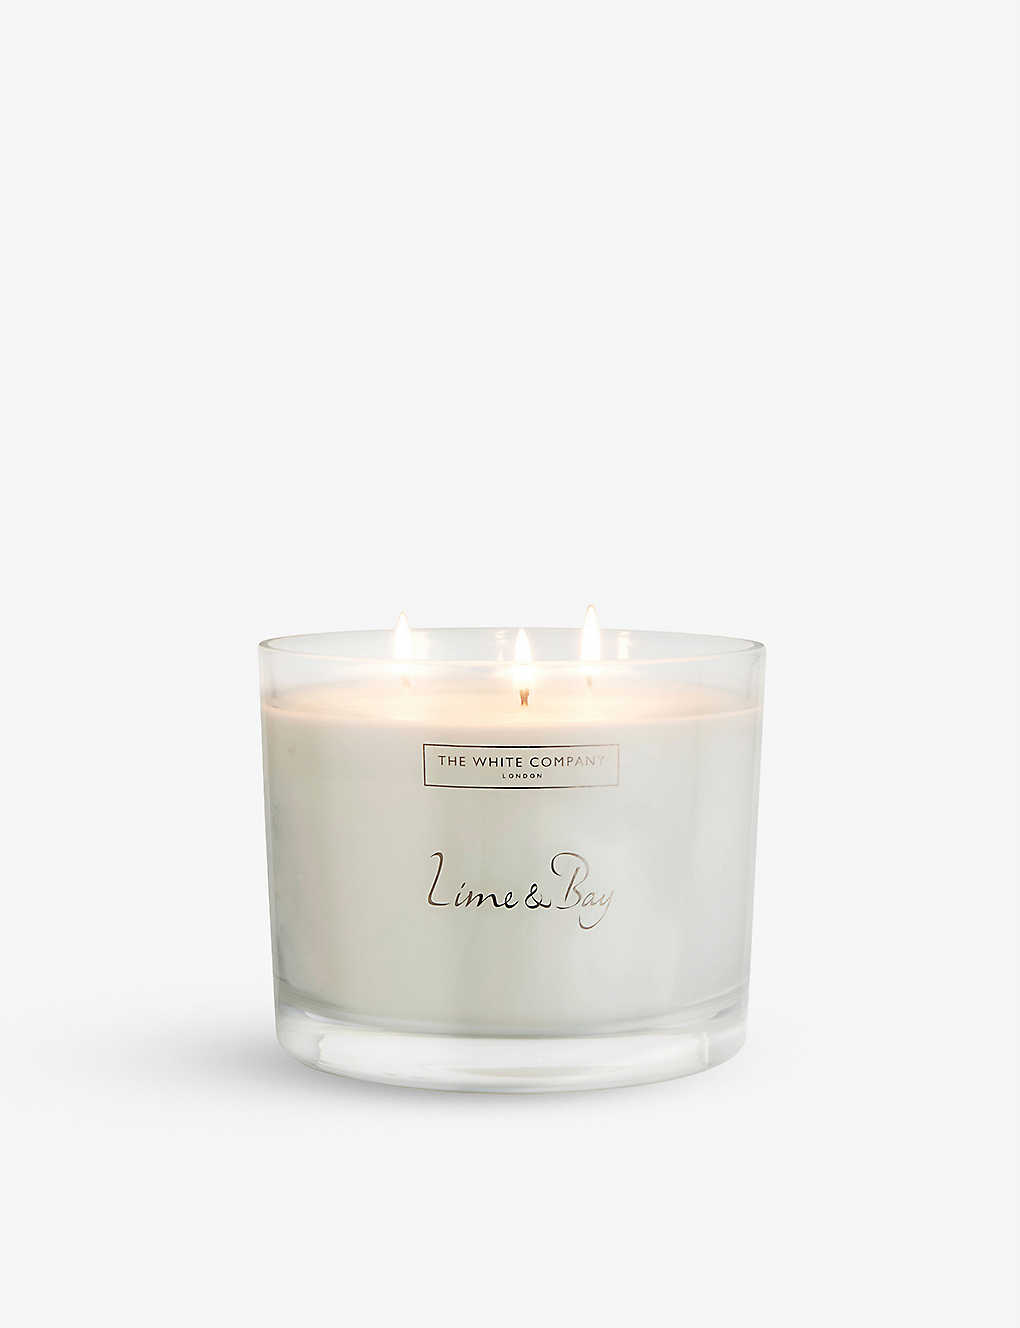 THE WHITE COMPANY ライムアンドベイ ラージ香り付きキャンドル 770g Lime and Bay large scented candle 770g